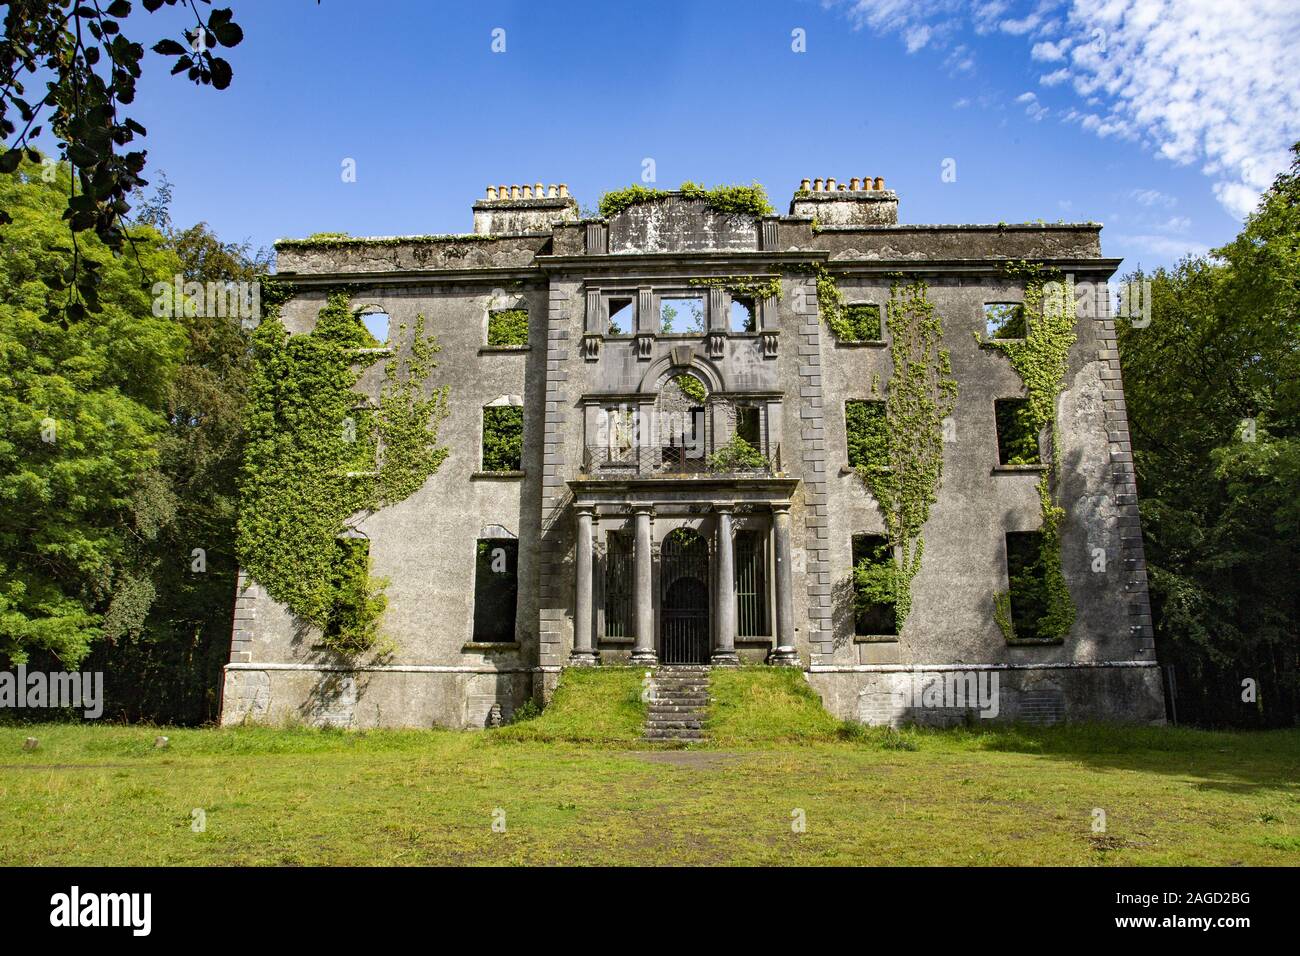 MUCKLOON, COUNTY MAYO, IRELAND - Aug 06, 2019: The ruined house and estate of aristocrat and wine merchant George Henry Moore who fed and saved his te Stock Photo